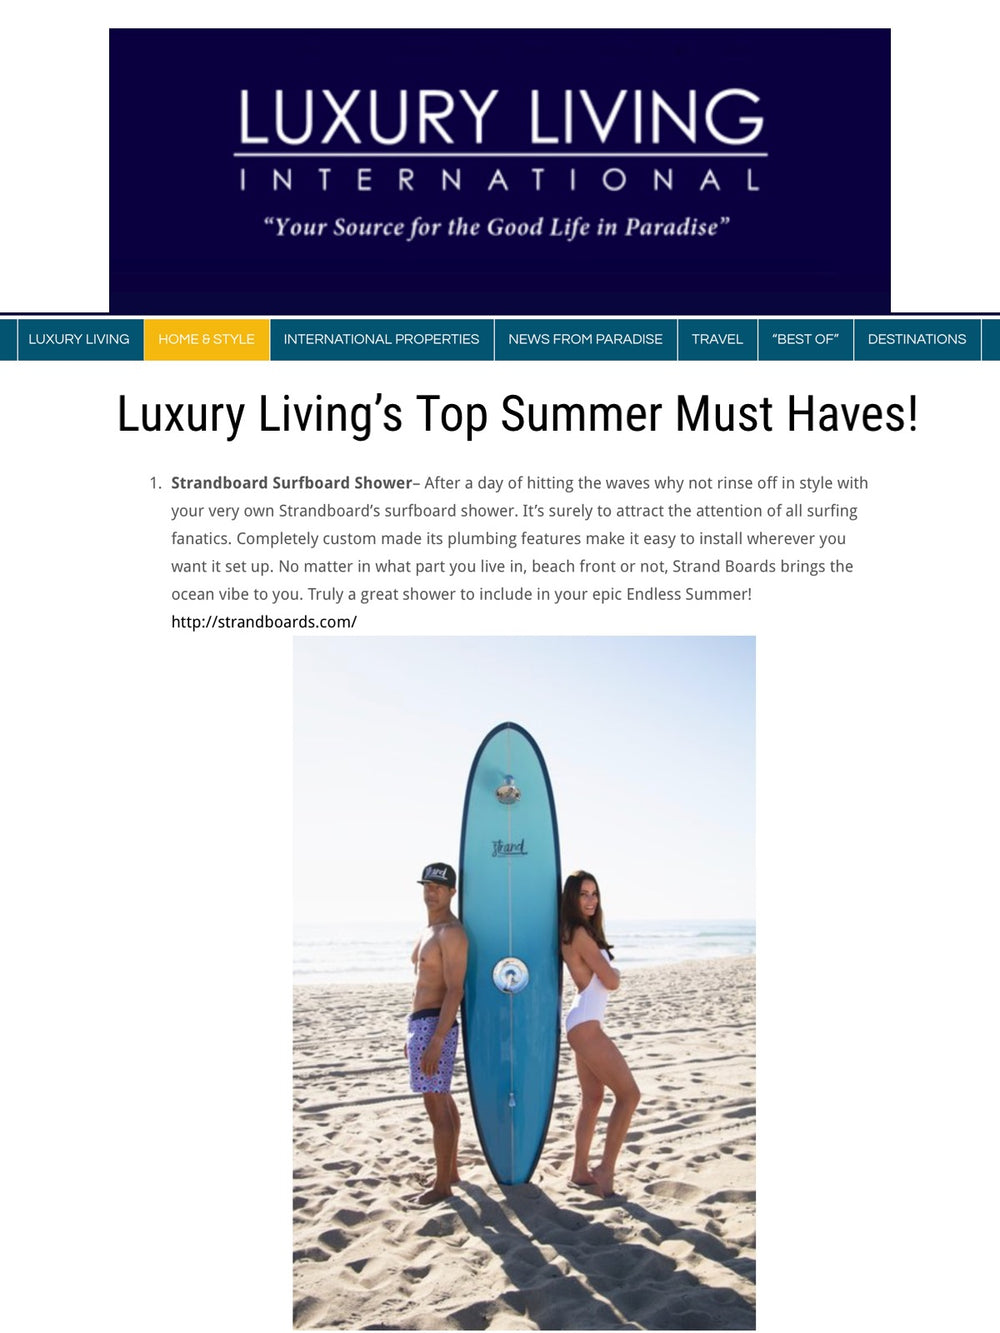 Luxury Living's Top Summer Must Haves!